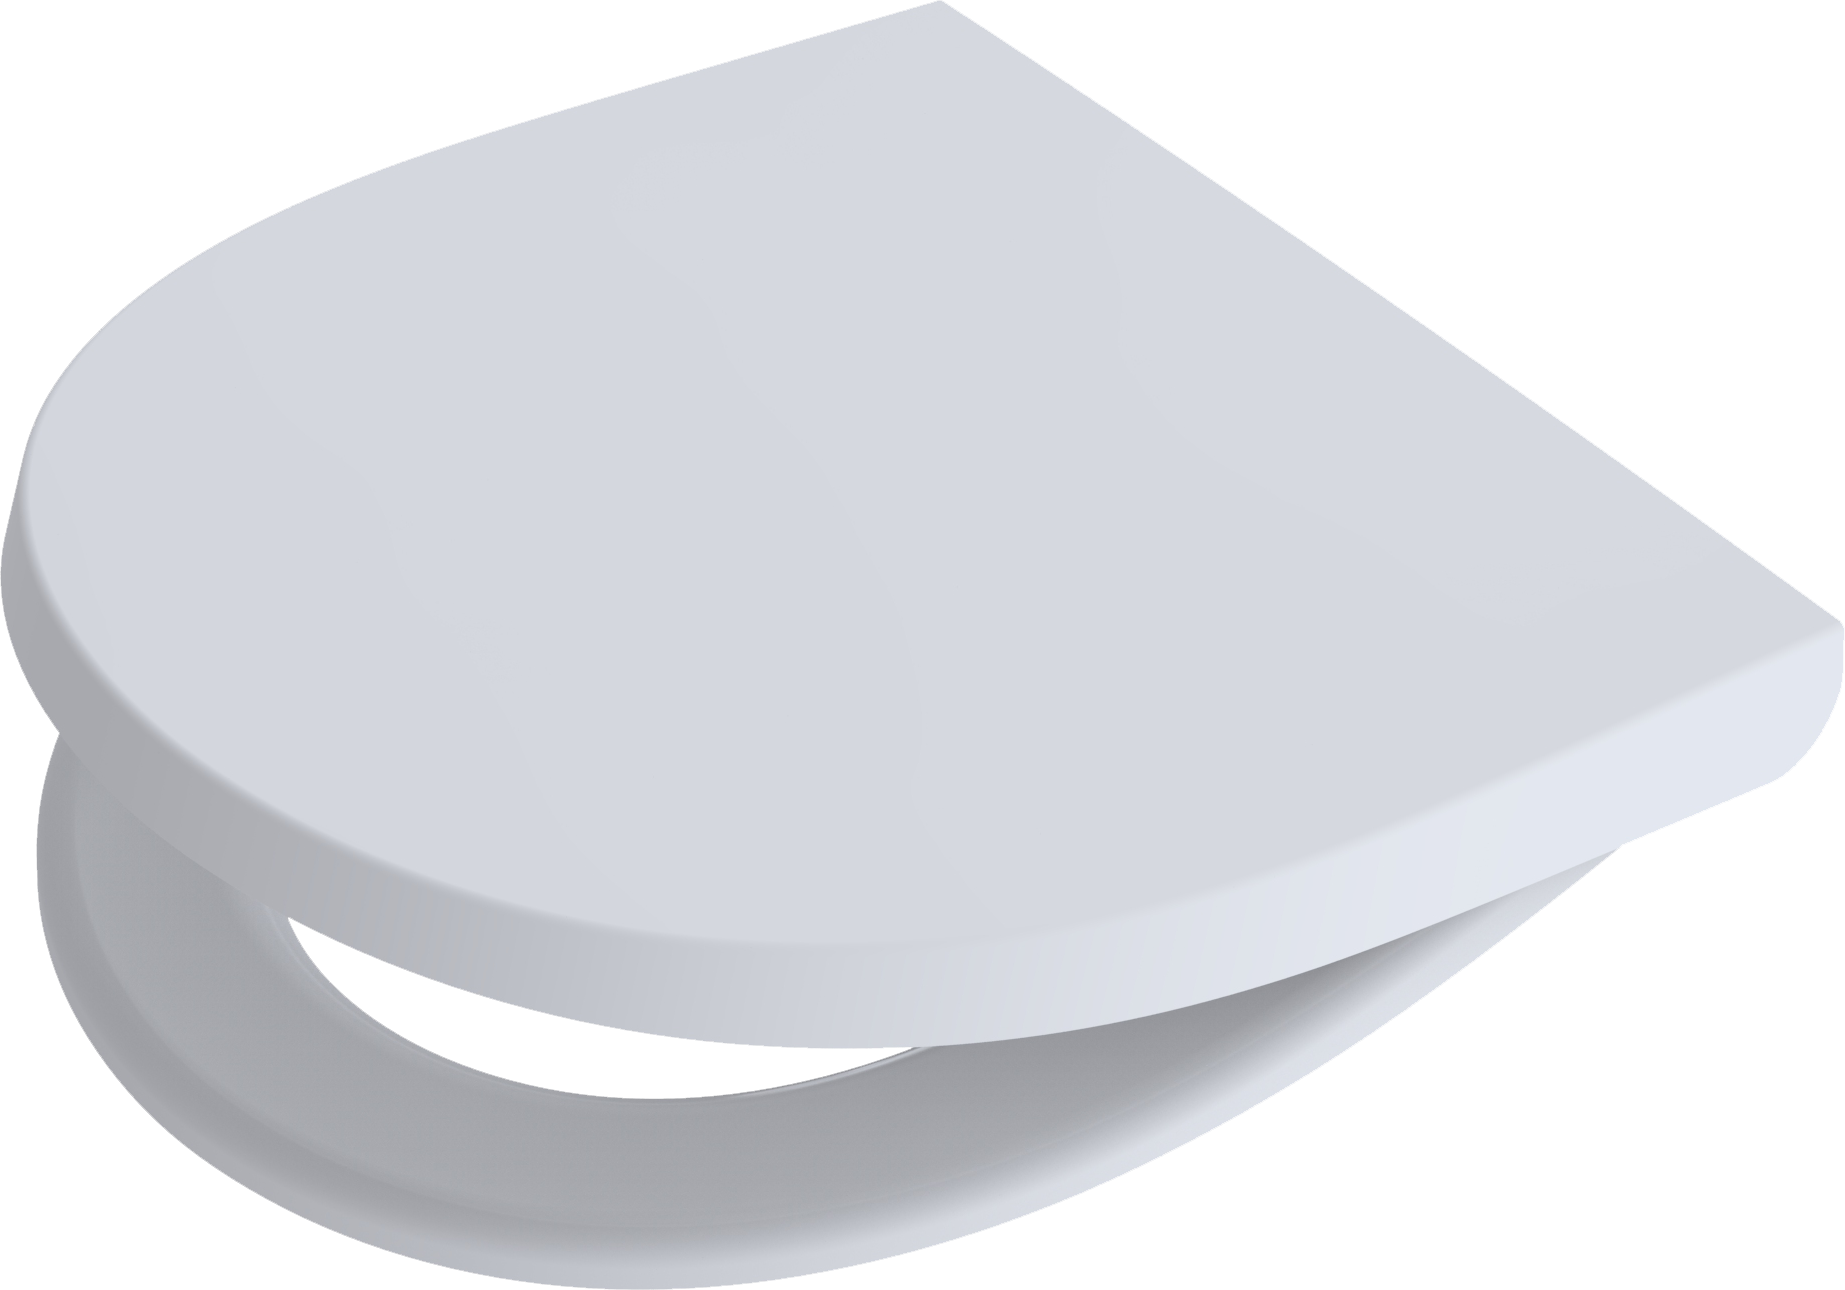 Picture of PAGETTE Kadett 300 S toilet seat with integr. soft close, removable with click-o-matic 793884002 white